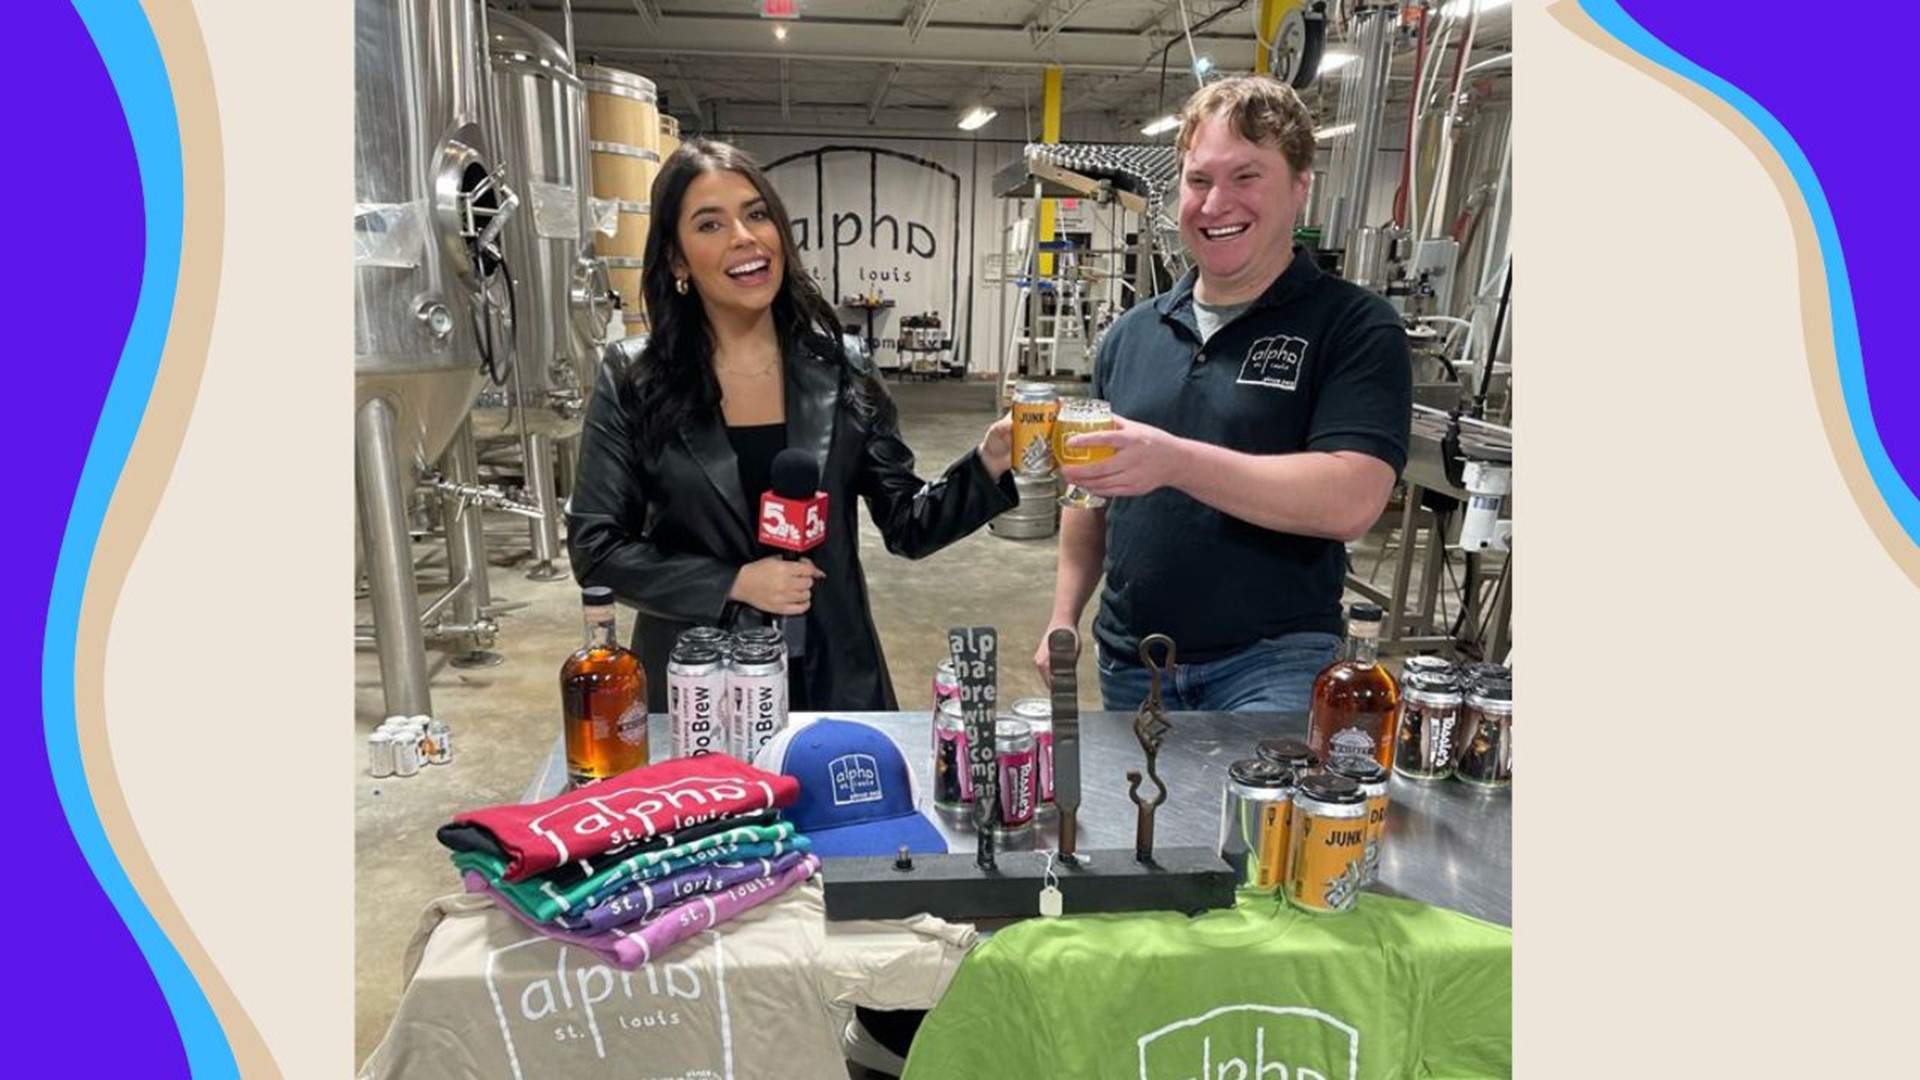 Dana DiPiazza got to the bottom of the "junk drawer" Monday morning at Alpha Brewing Company. After new year cleanouts, Alpha's "I do" brew is up next on the menu!